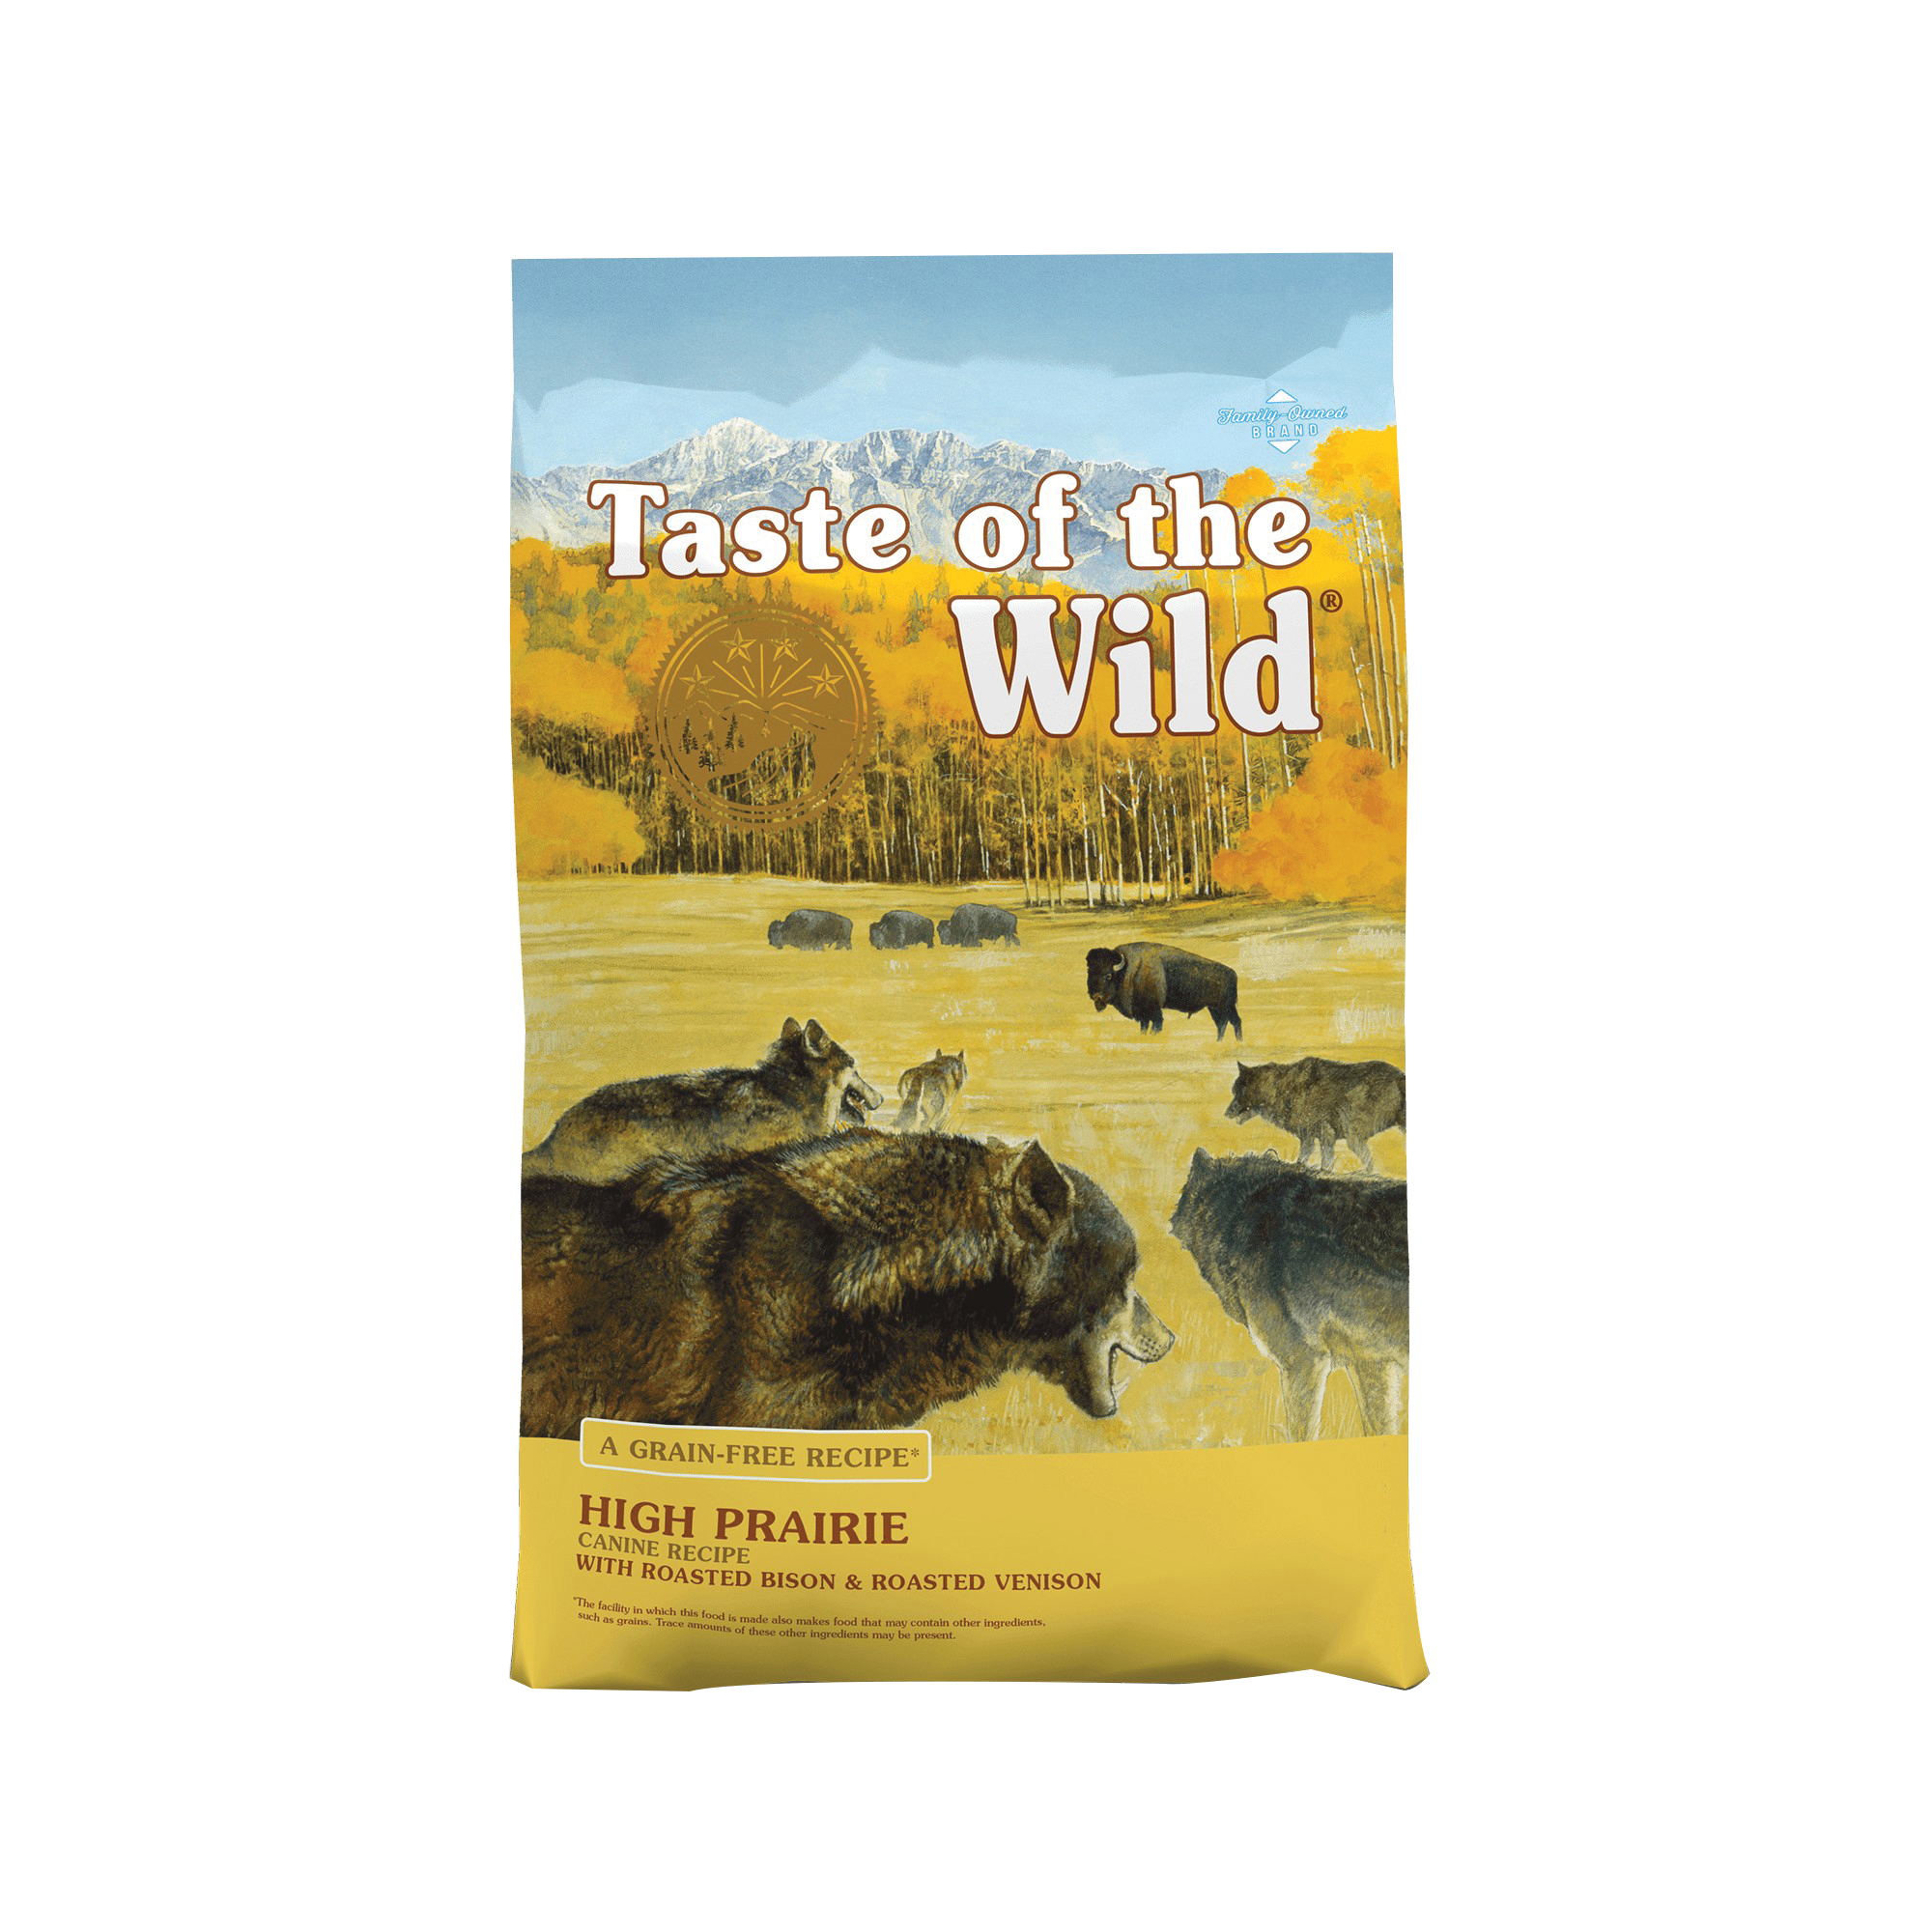 Taste of the Wild TOW9567 Dog Food, Dry, Roasted Bison an